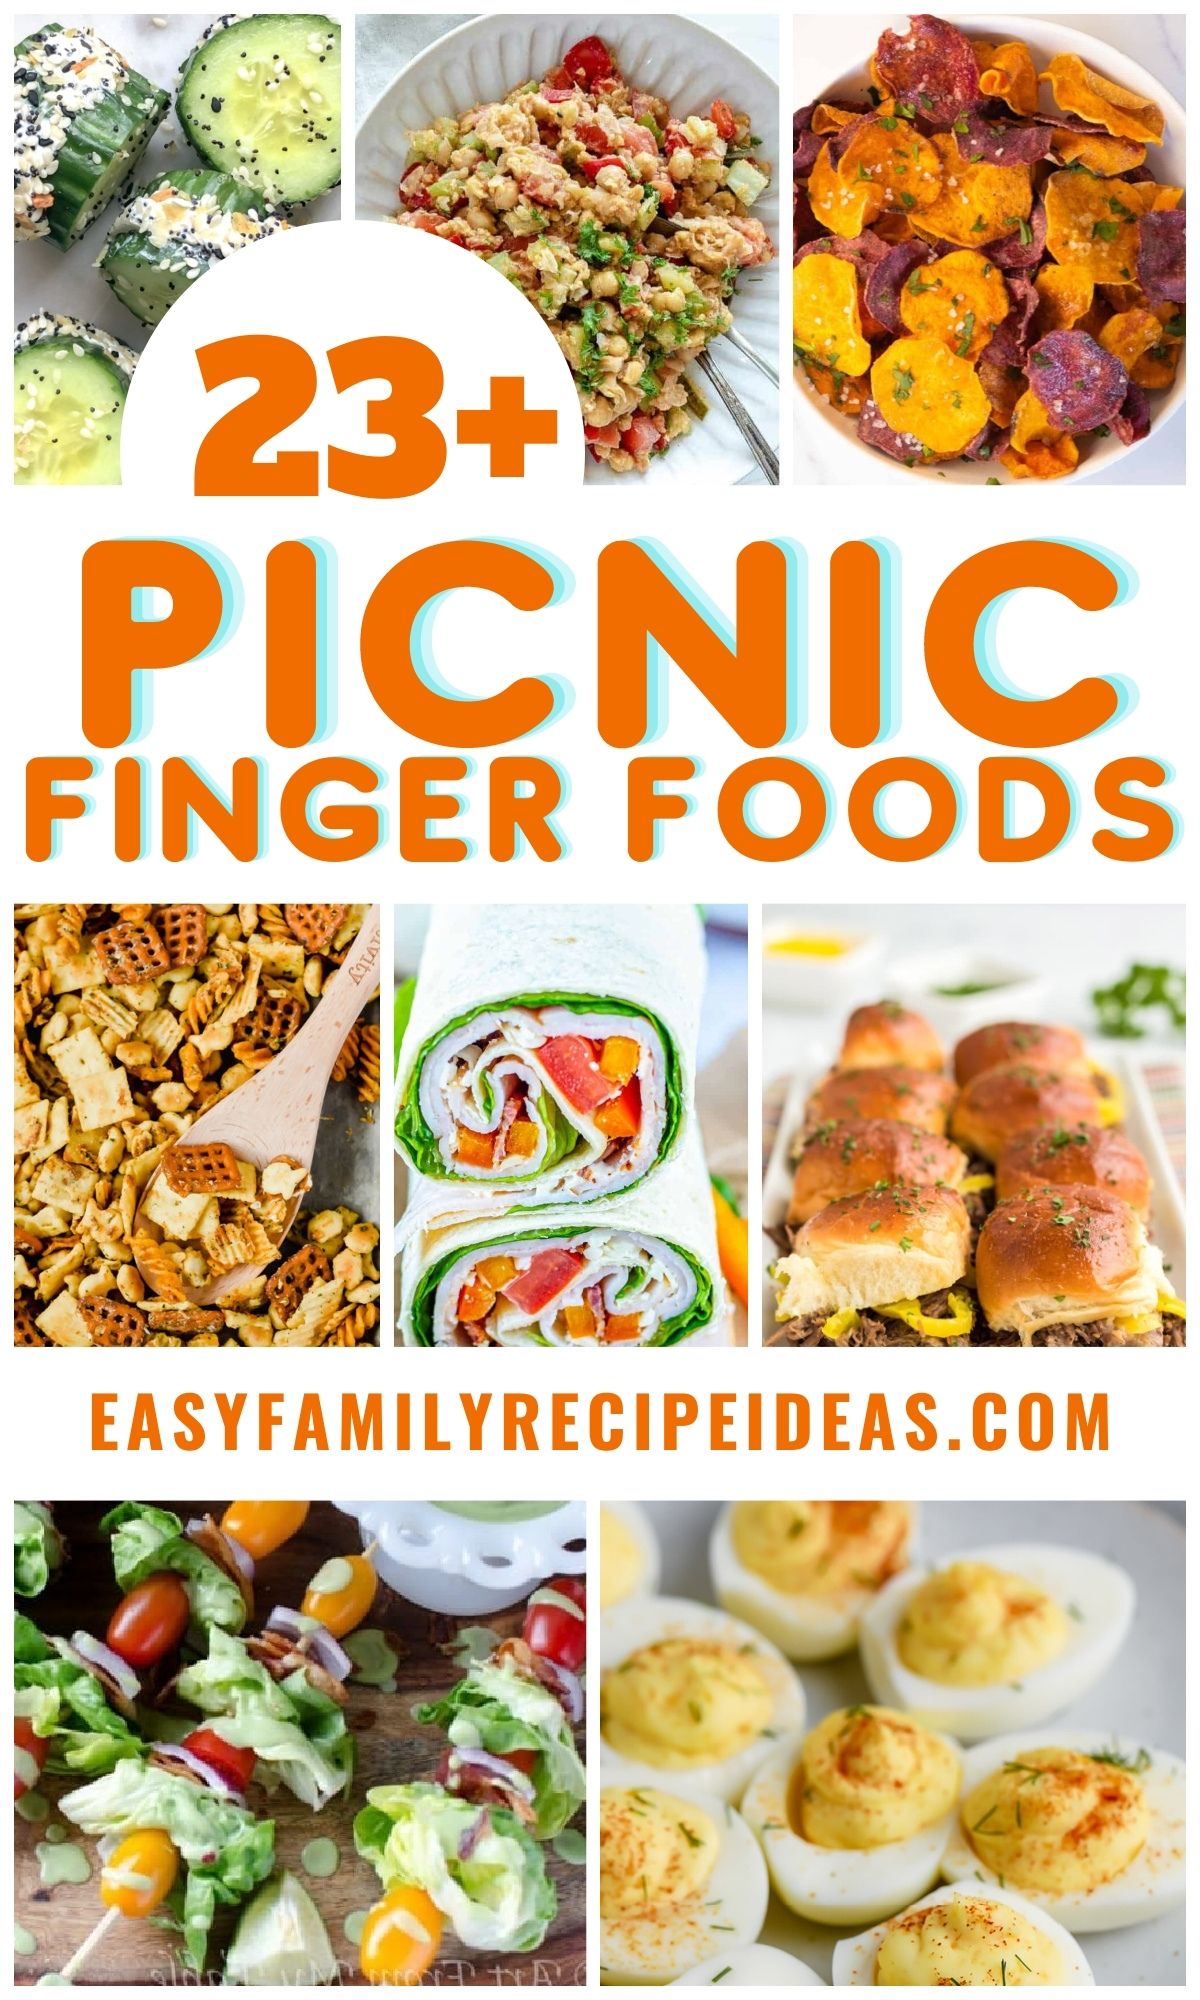 25 Delicious Picnic Finger Foods for Kids and Adults